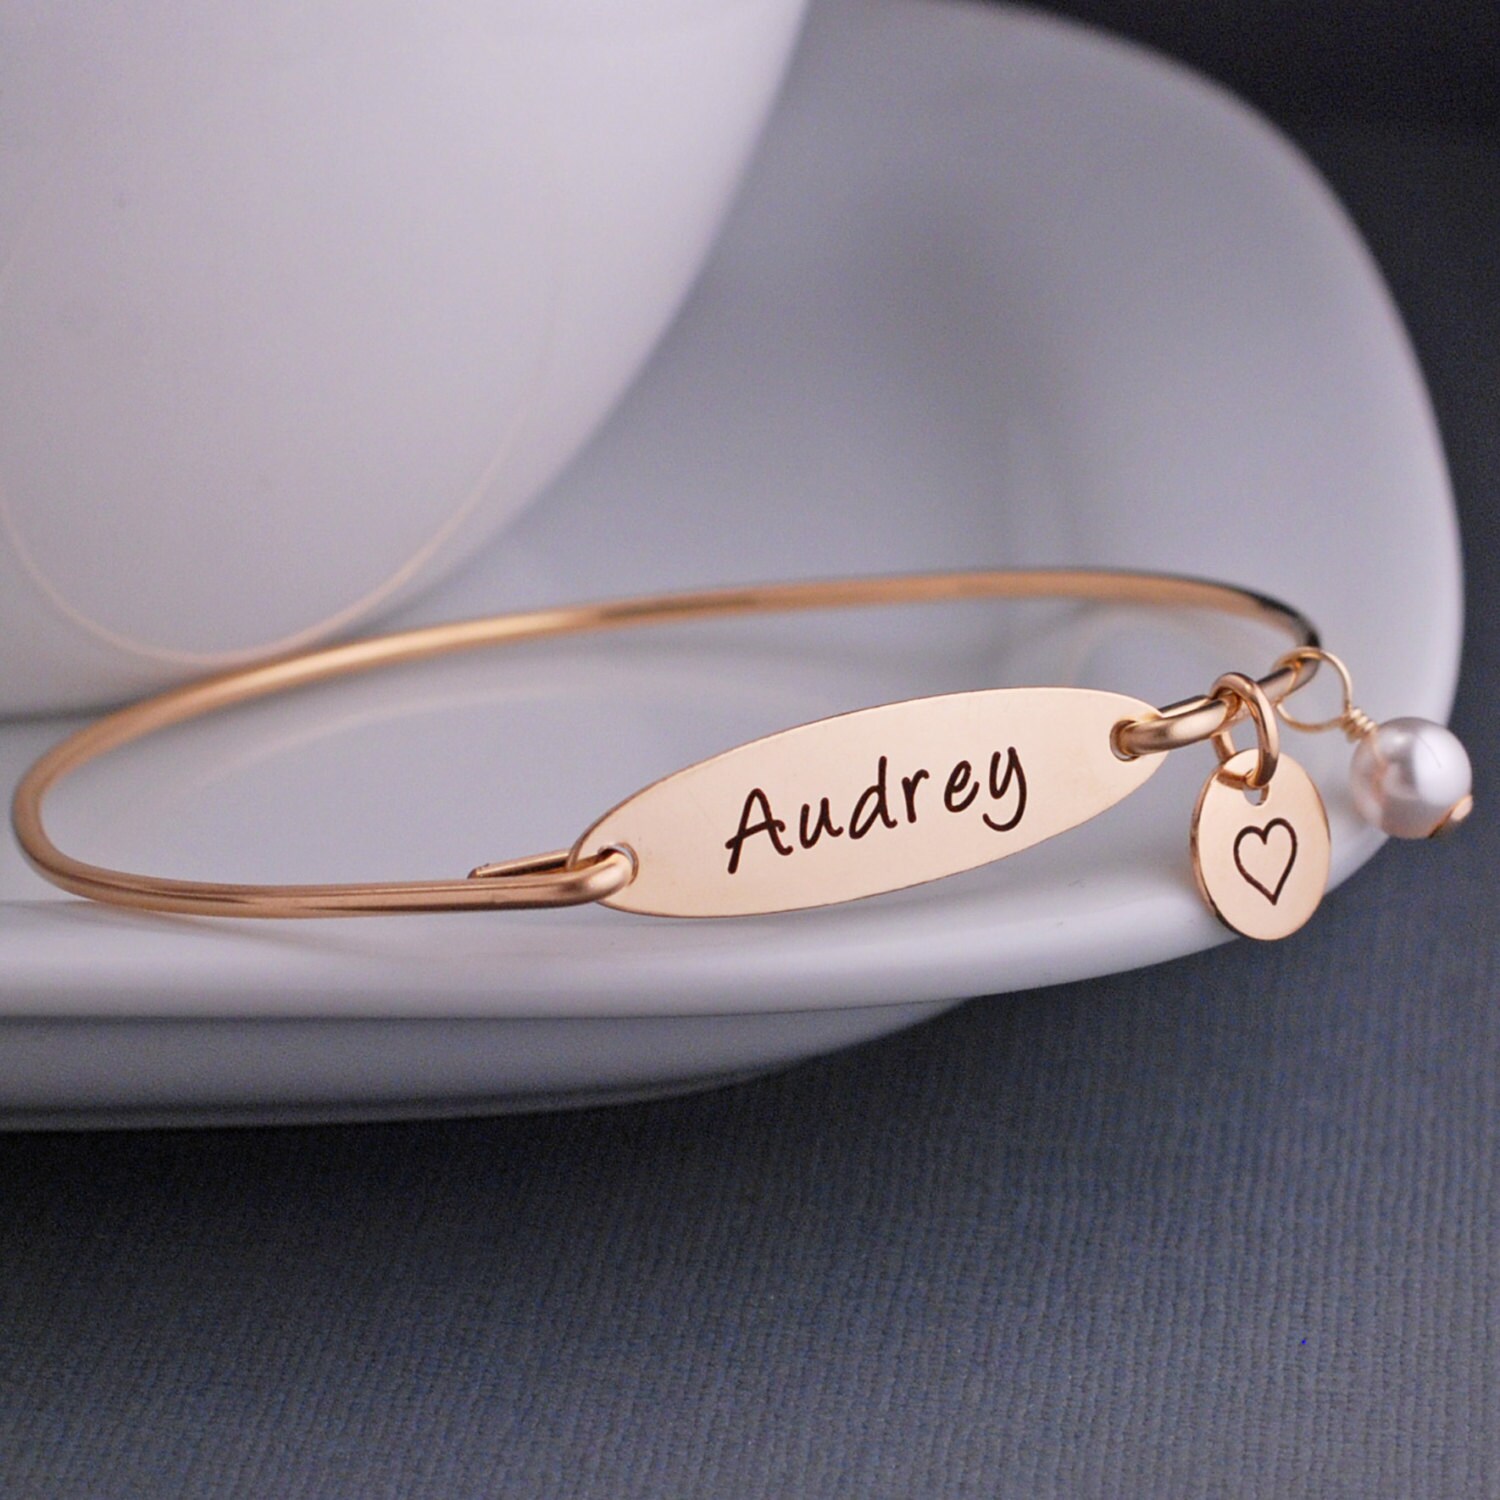 Your Kids' Names On A Leather Bracelet Is The Perfect Dad Gift